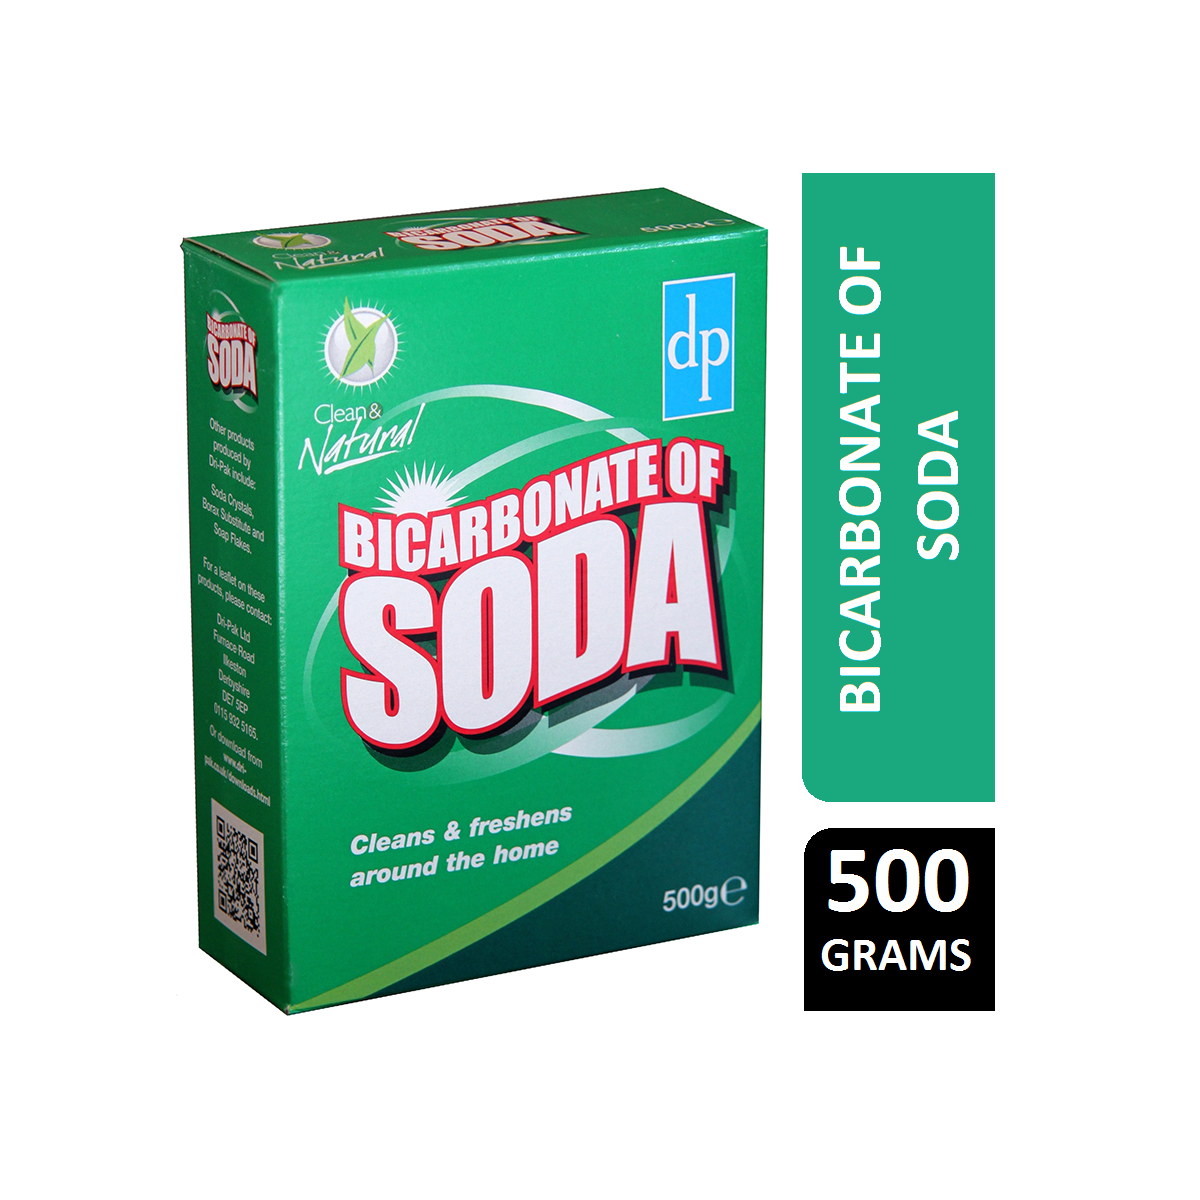 Where to Buy Bicarbonate of Soda